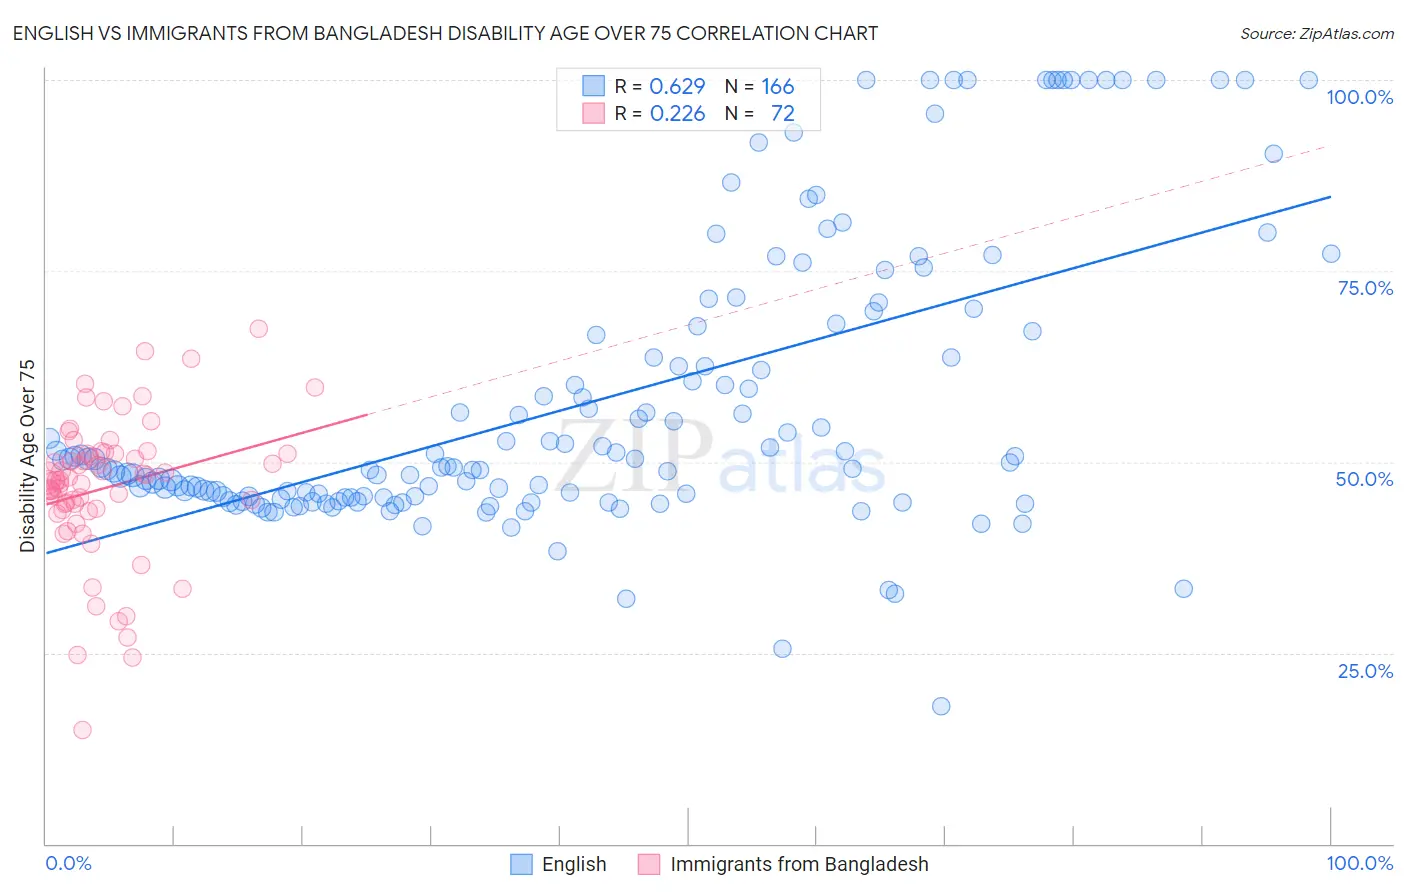 English vs Immigrants from Bangladesh Disability Age Over 75